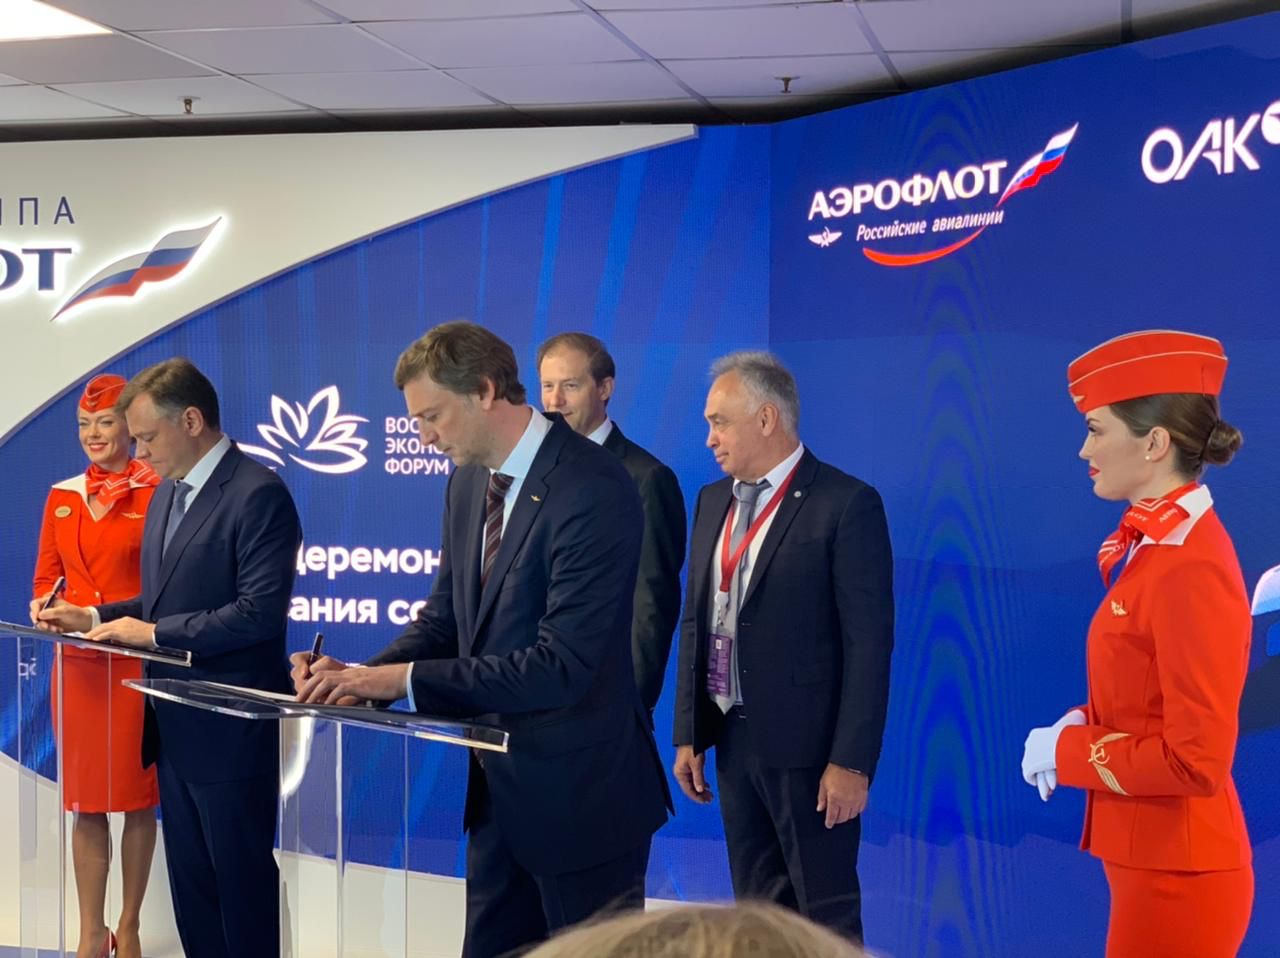 Rostec to supply 339 Russian-made aircraft to Aeroflot